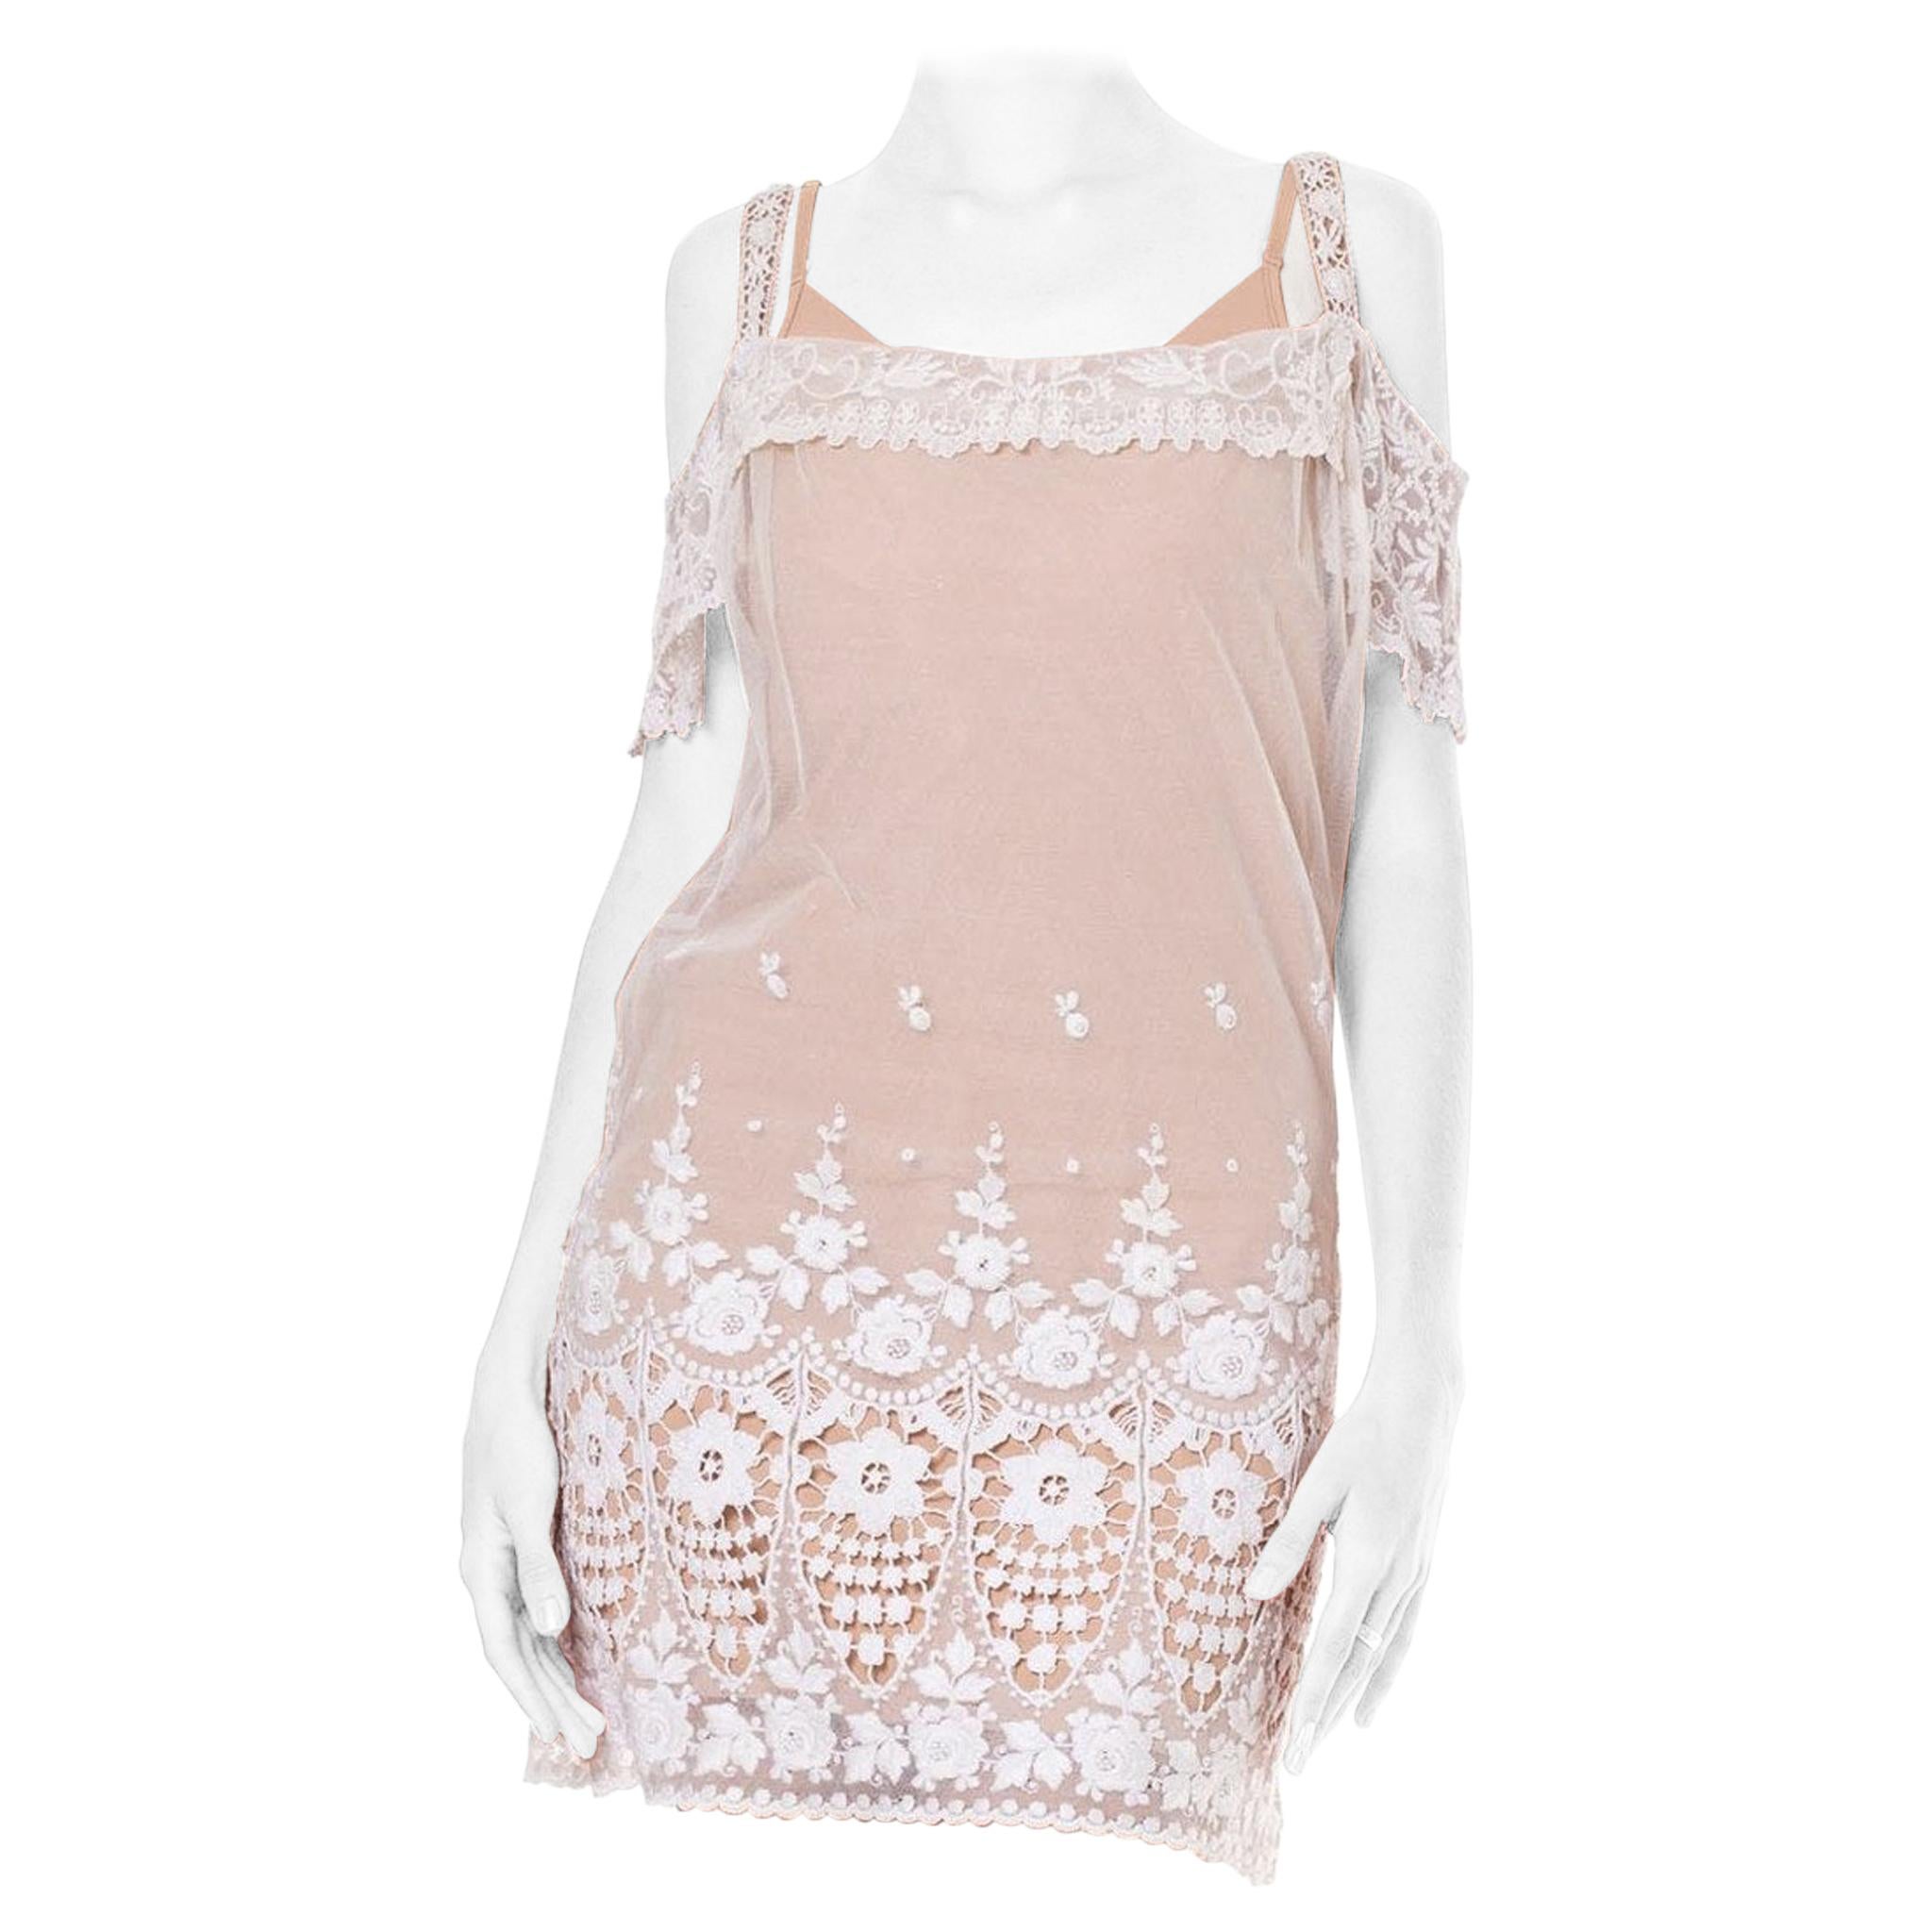 MORPHEW COLLECTION Style White Cotton Embroidered Tulle Short Lace Dress